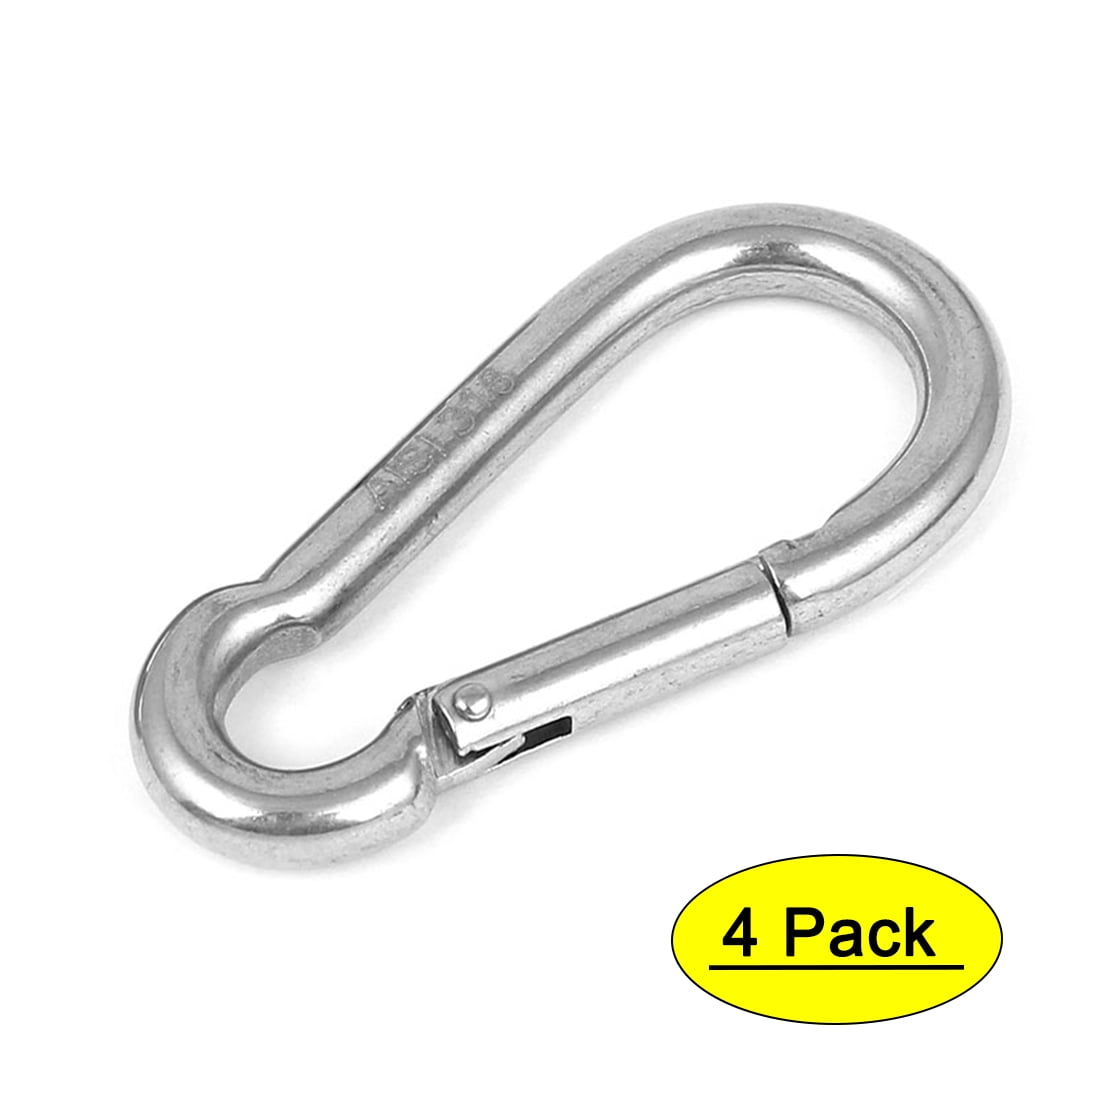 Unique Bargains 316 Stainless Steel Spring Snap Hook Carabiners 2.4 Length  4pcs 